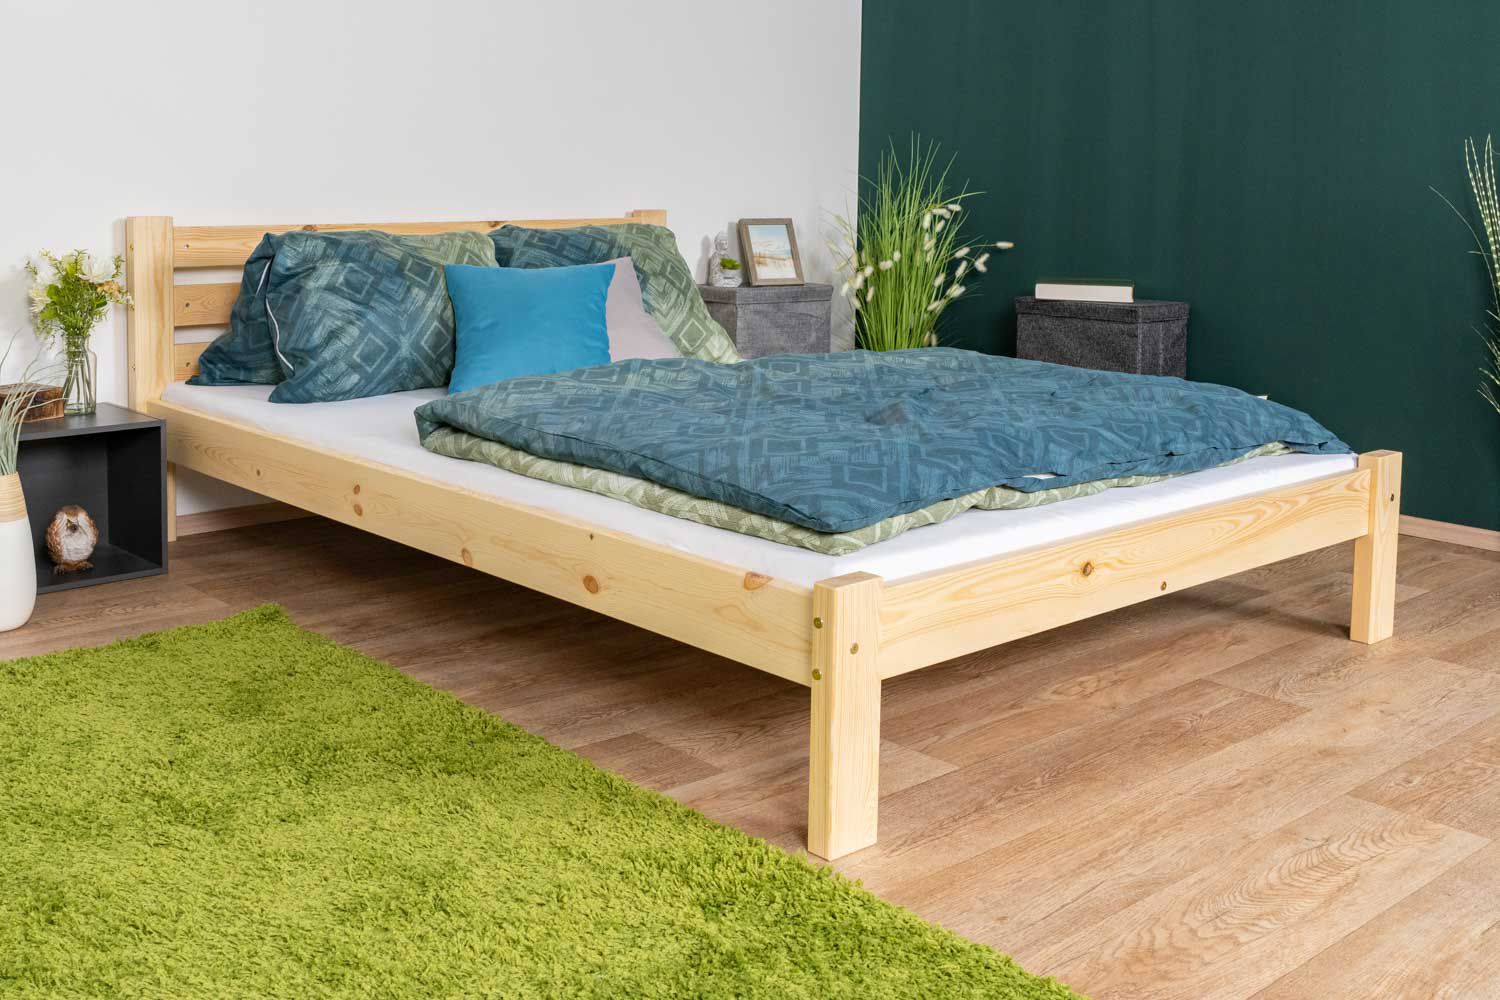 Children's bed / Youth bed A2, solid pine wood, clearly varnished, incl. slatted frame - 140 x 200 cm